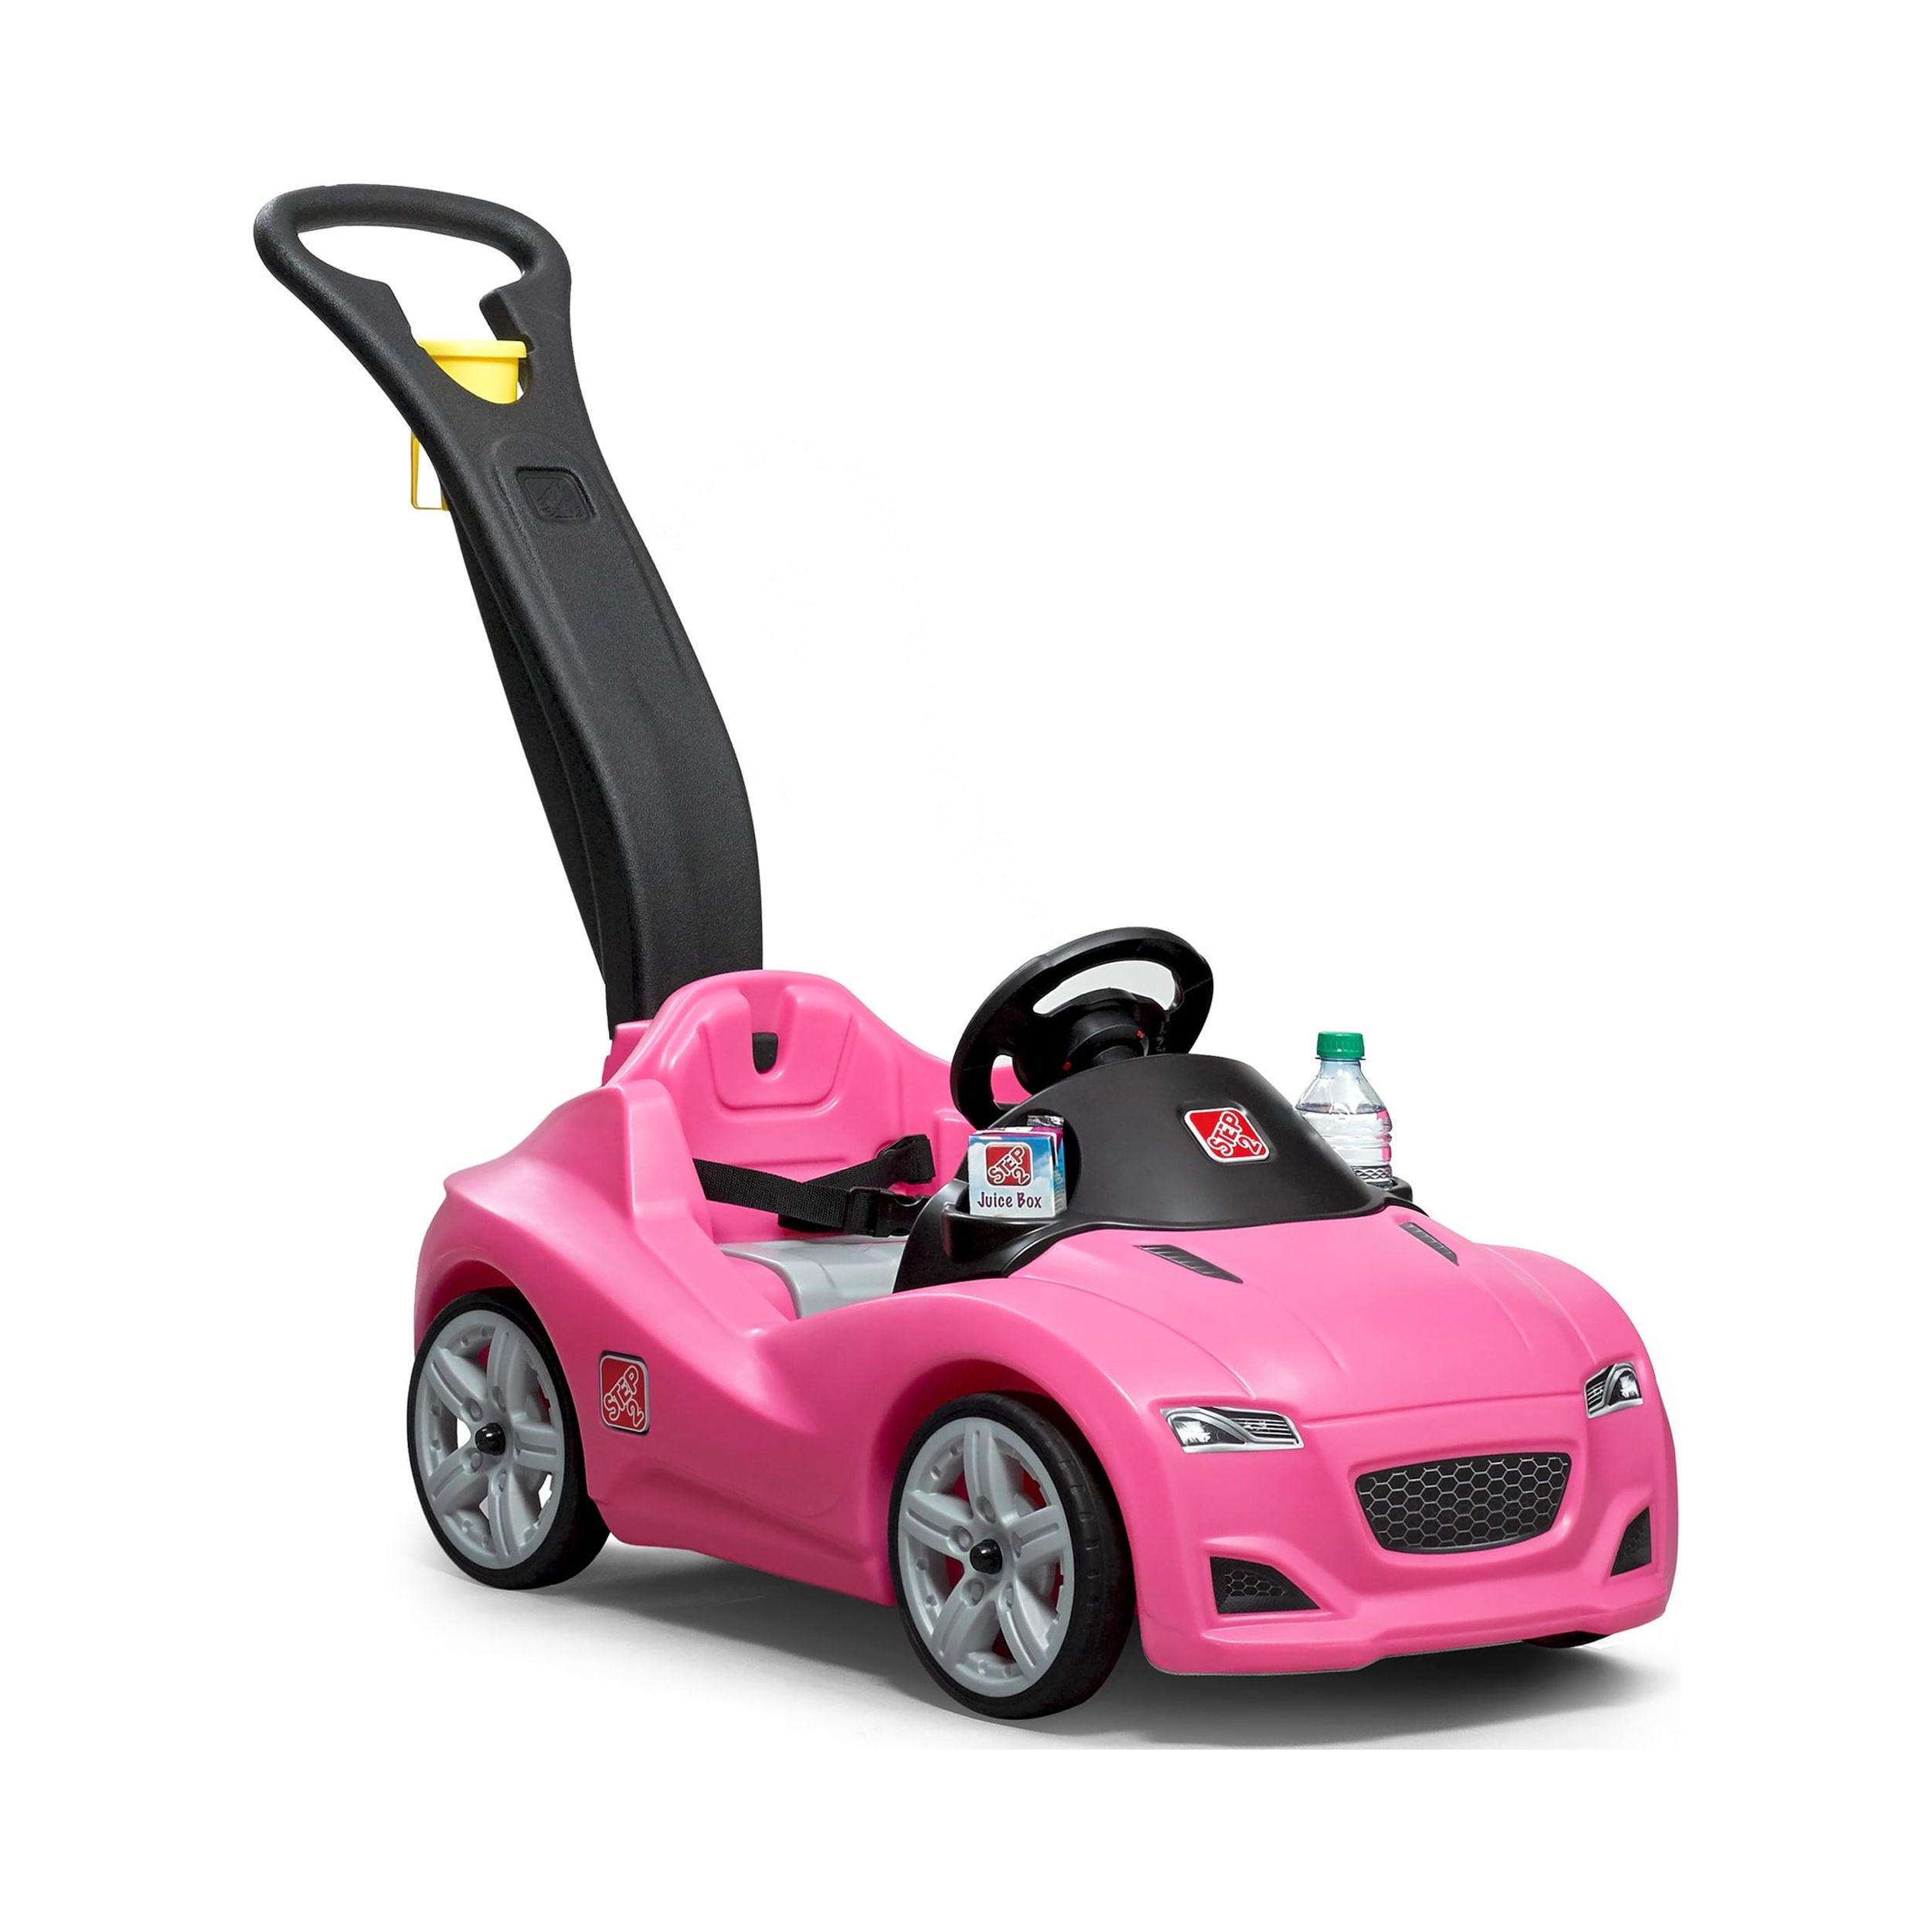 Step2 Whisper Ride Cruiser Pink Toddler Push Car and Ride on for Toddlers - image 1 of 11